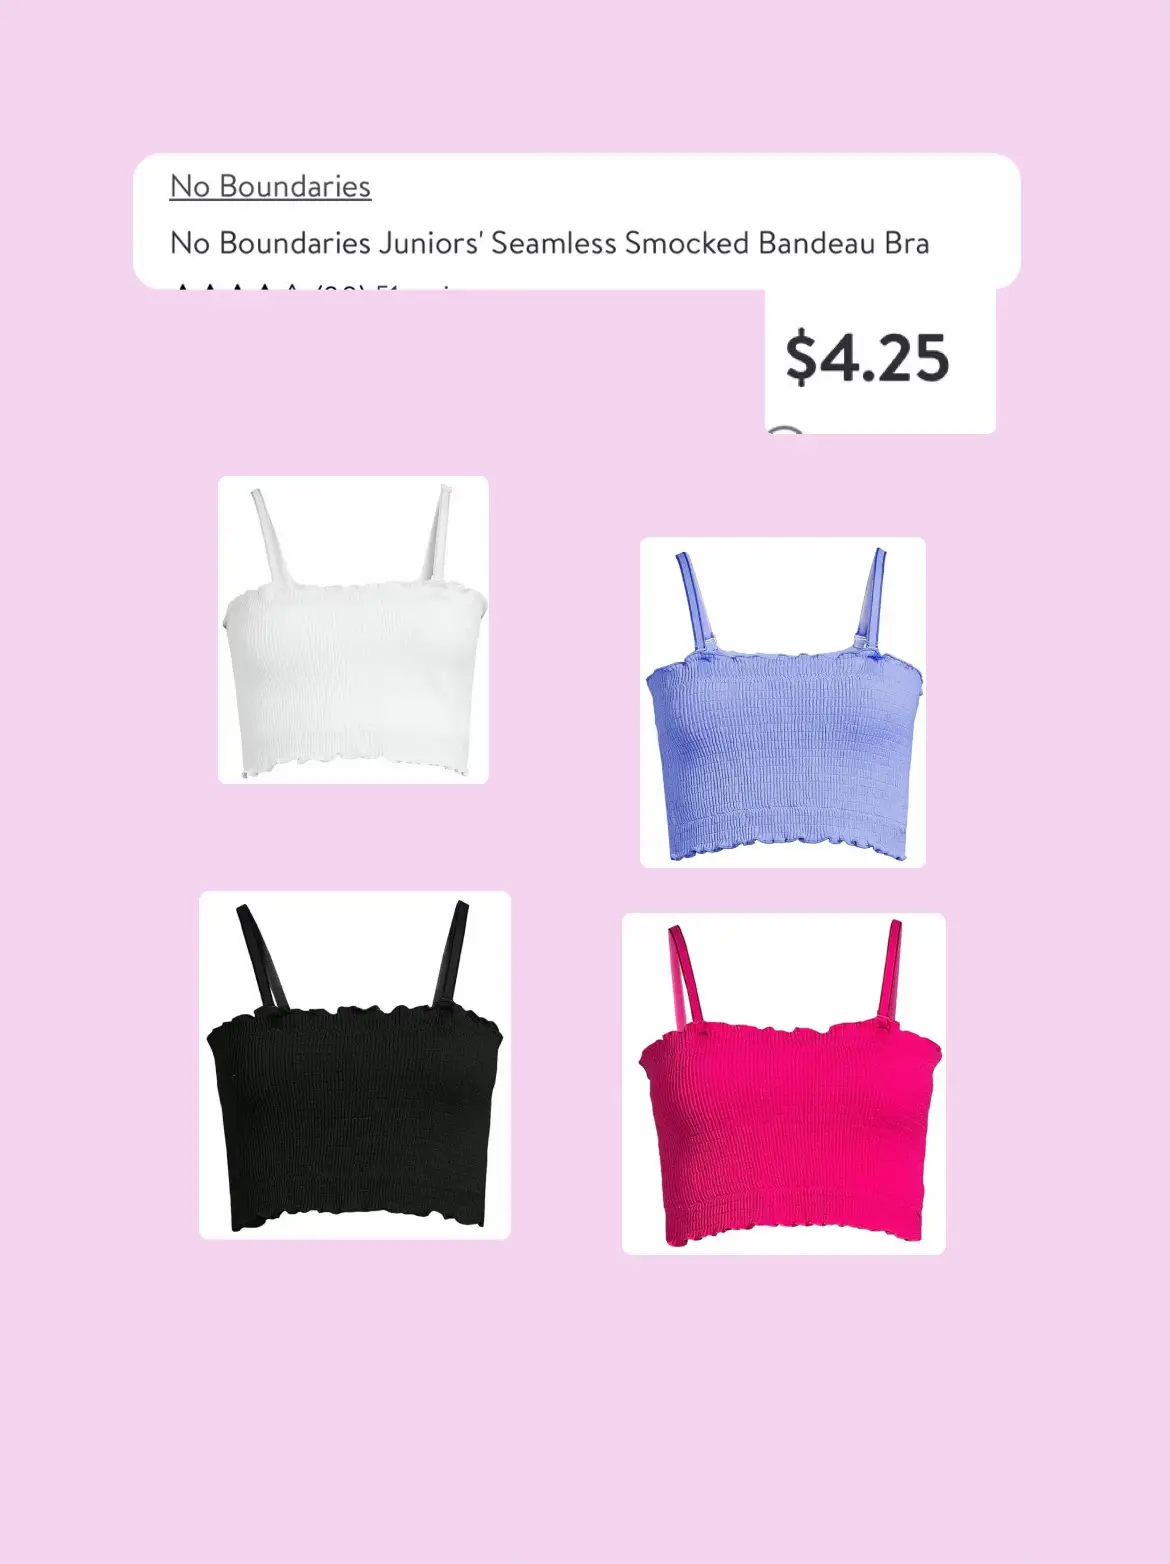 🥰 Loving these new ribbed cami bras from No Boundaries! 😍 Even more